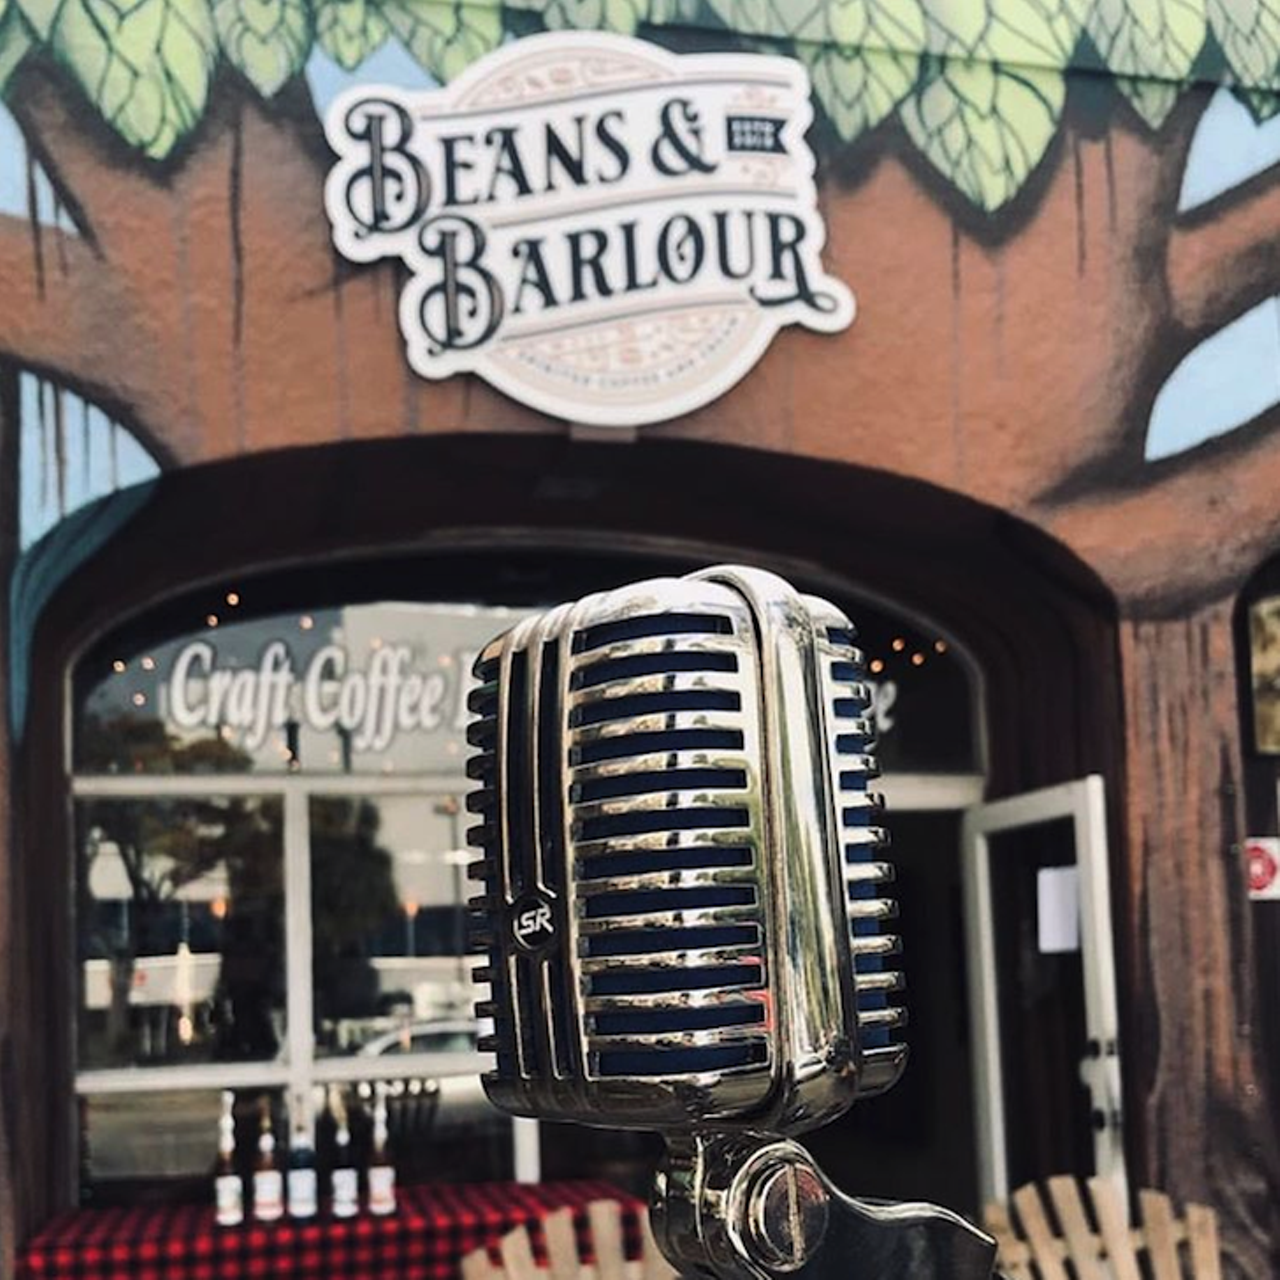 Beans & Barlour  
538 1st Ave N, St. Pete, 727-440-4540
Remember Storybrooke Cafe? Well this joint is run by the same owner and serving up the former specialty brews. Beans & Barlous also offers booze treats, pastries as well as lunch and dinner plates.
Photo via Beans & Barlous/ Instagram 